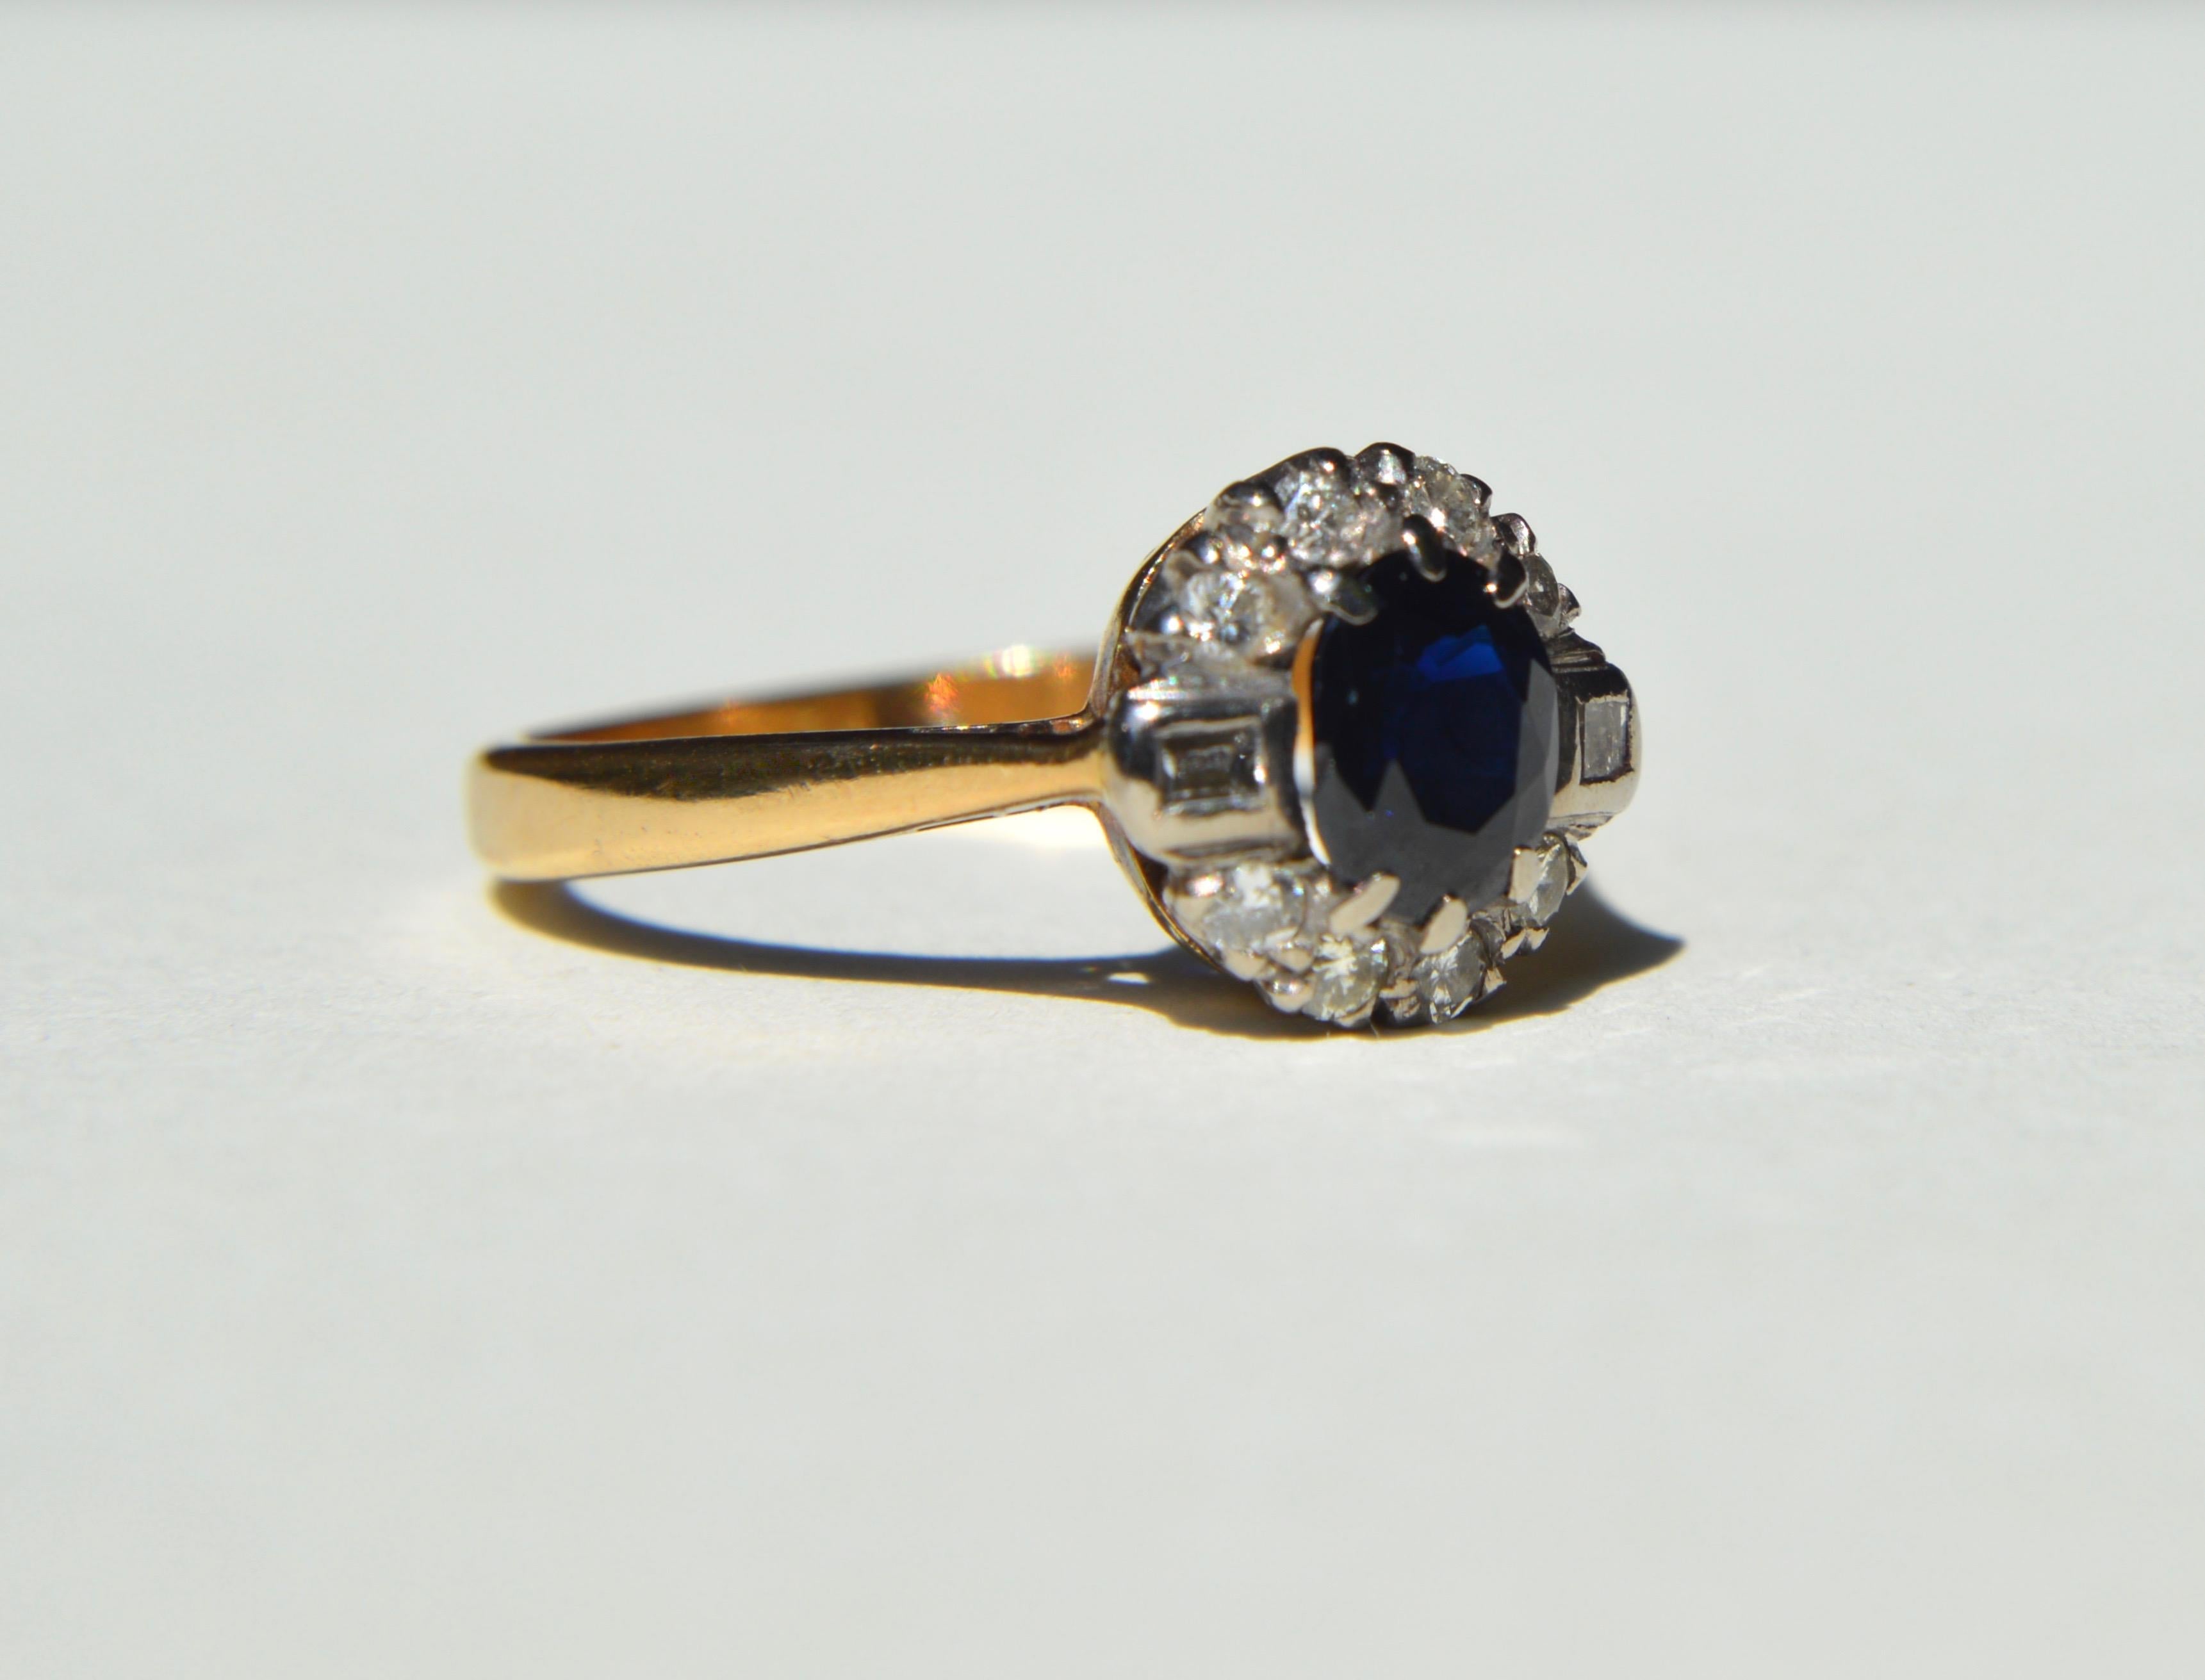 Beautiful vintage retro circa 1940s natural sapphire and diamond halo ring. 18K yellow gold. In very good condition, marked at 18K. Size 6.25, can be resized by a jeweler. Oval cut sapphire measures 6x5mm, .61 carat. Surrounded by 8 round cut